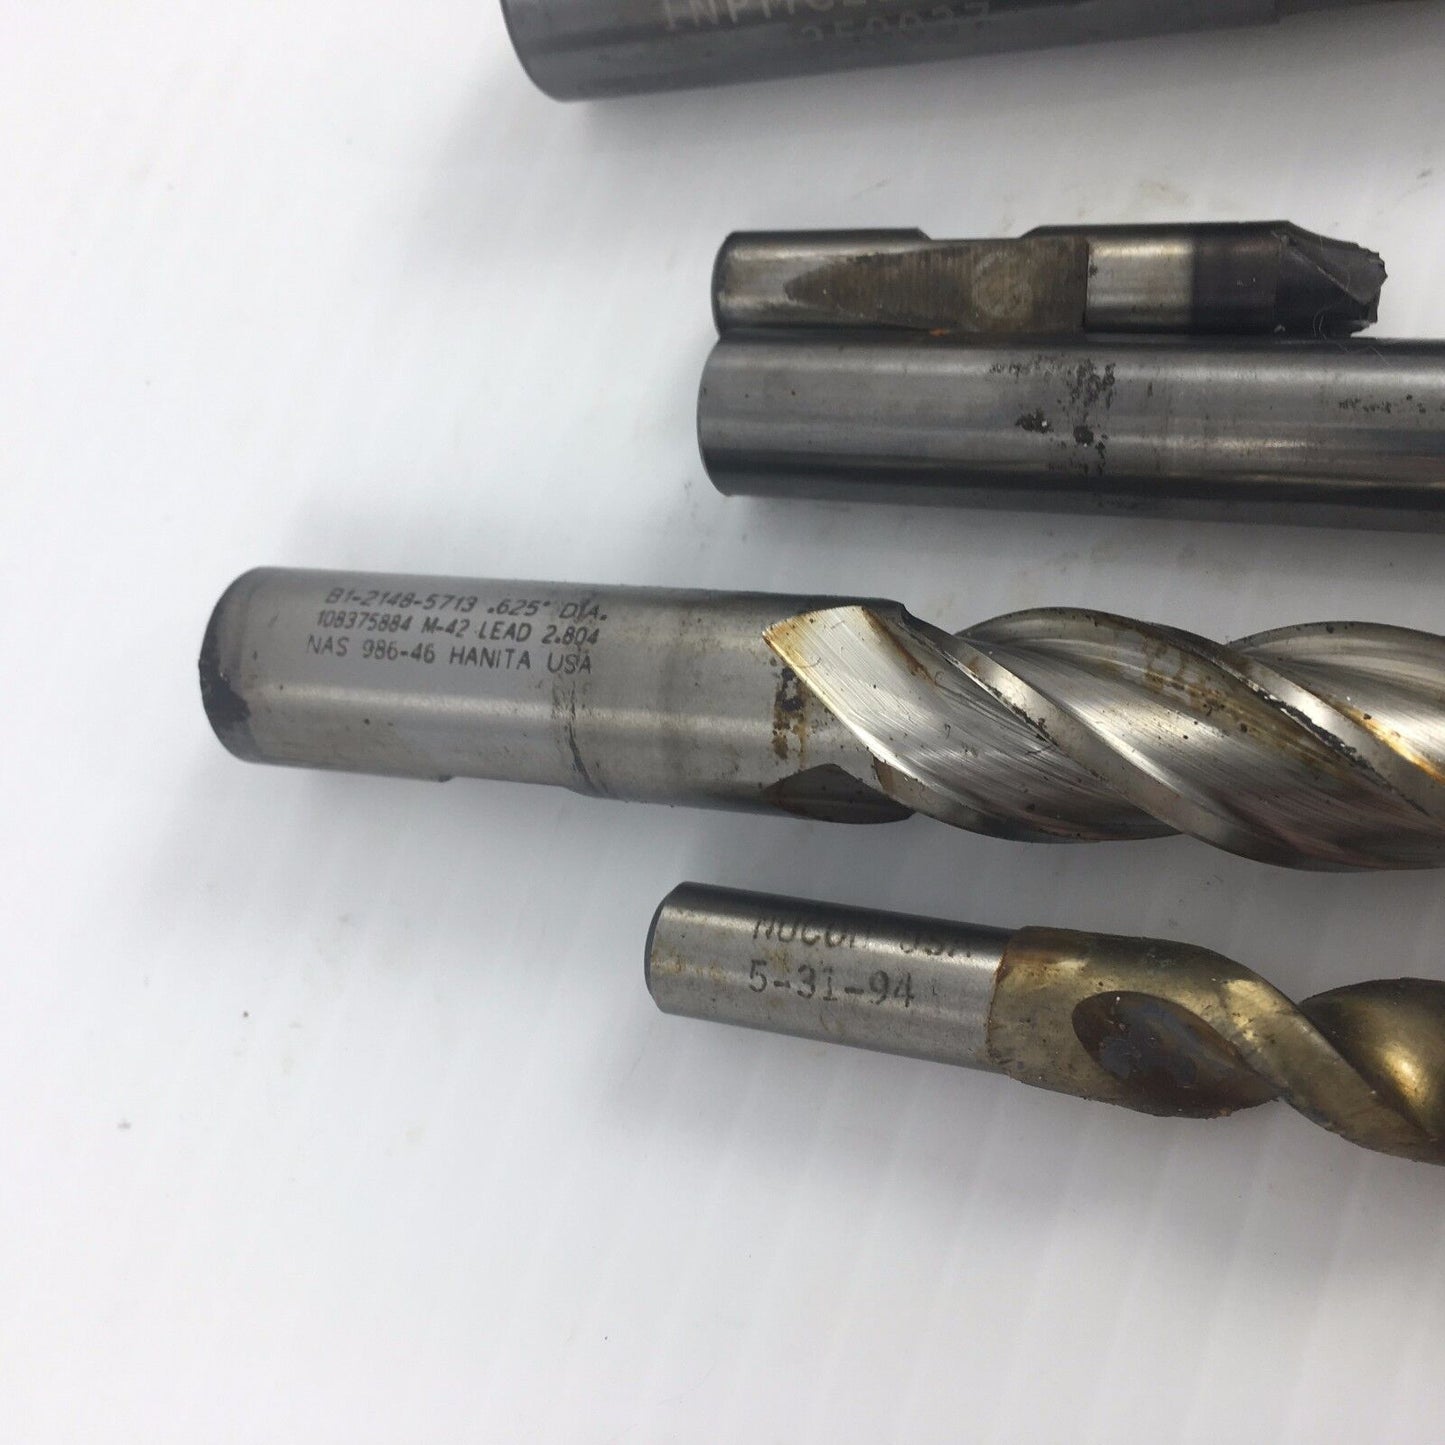 Lot of 7 HSS End Mill Drills Hanita, Helical, Jarvis 3/8"- 3/4"